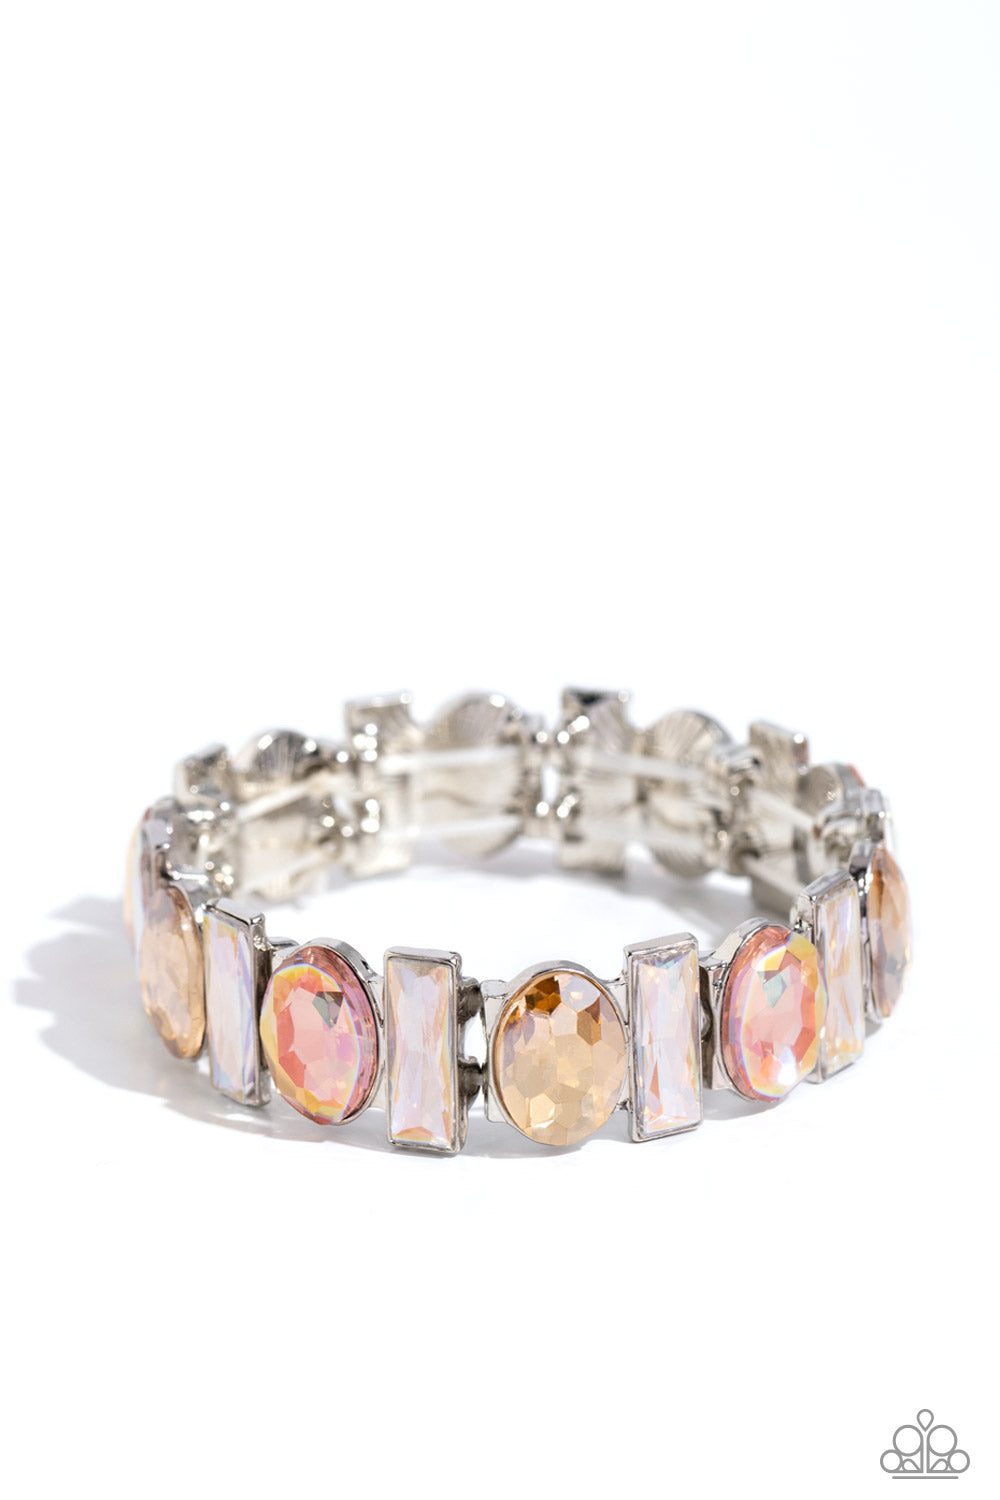 Complimentary Couture - Multi Bracelet